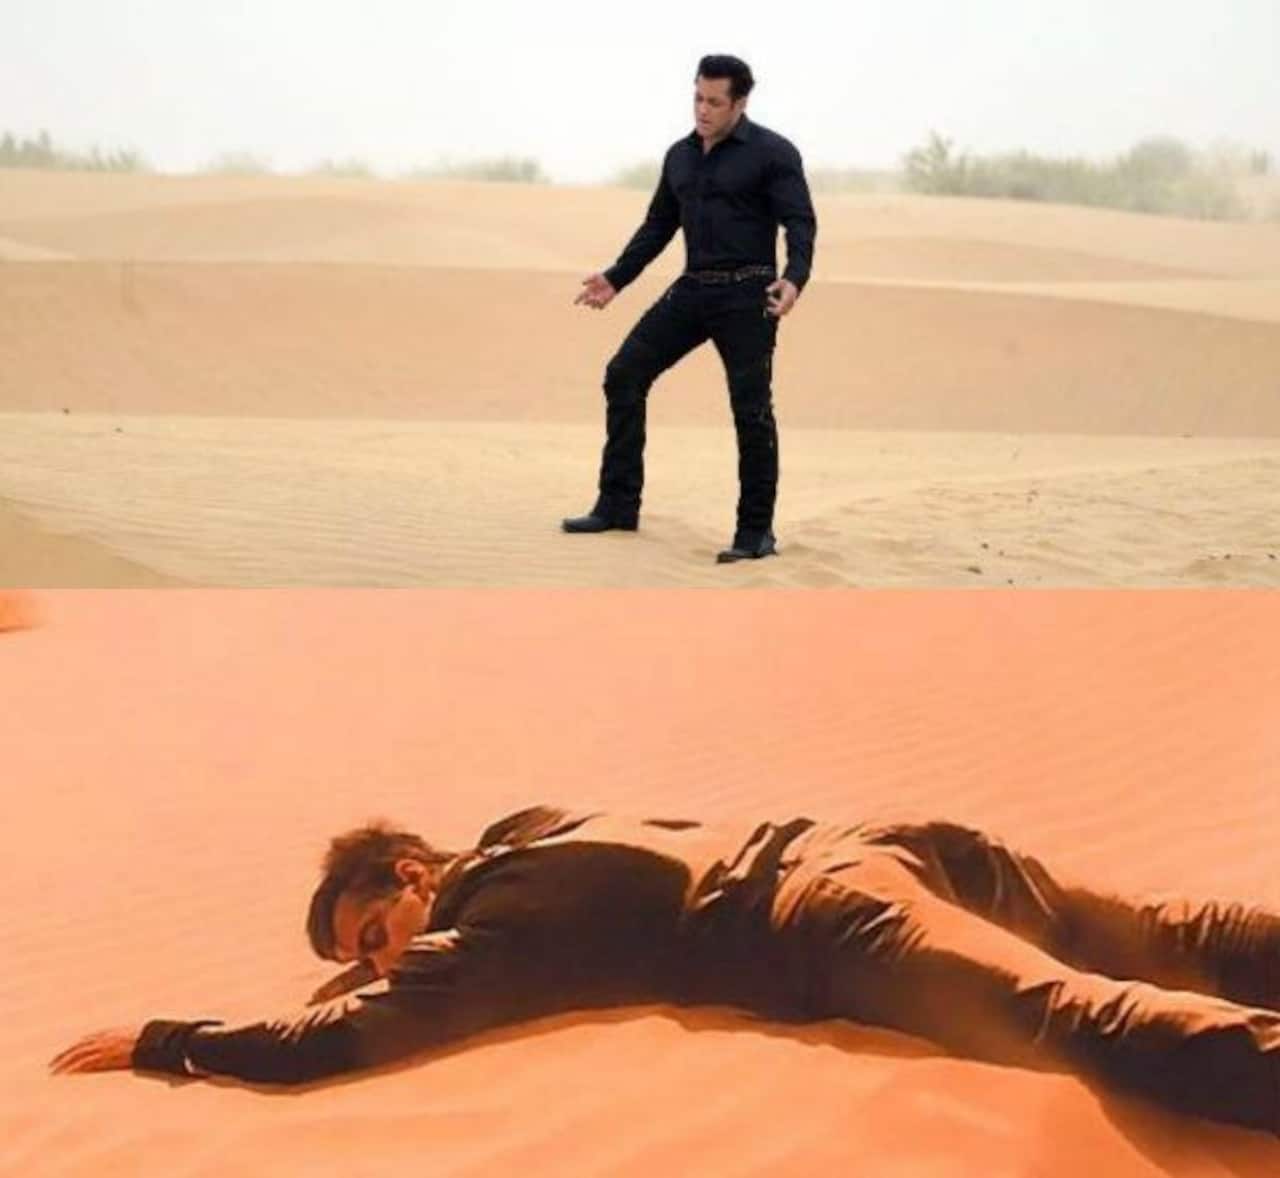 Salman Khan stranded in a desert in this still from Race 3 instantly reminds us of Hum Dil De Chuke Sanam